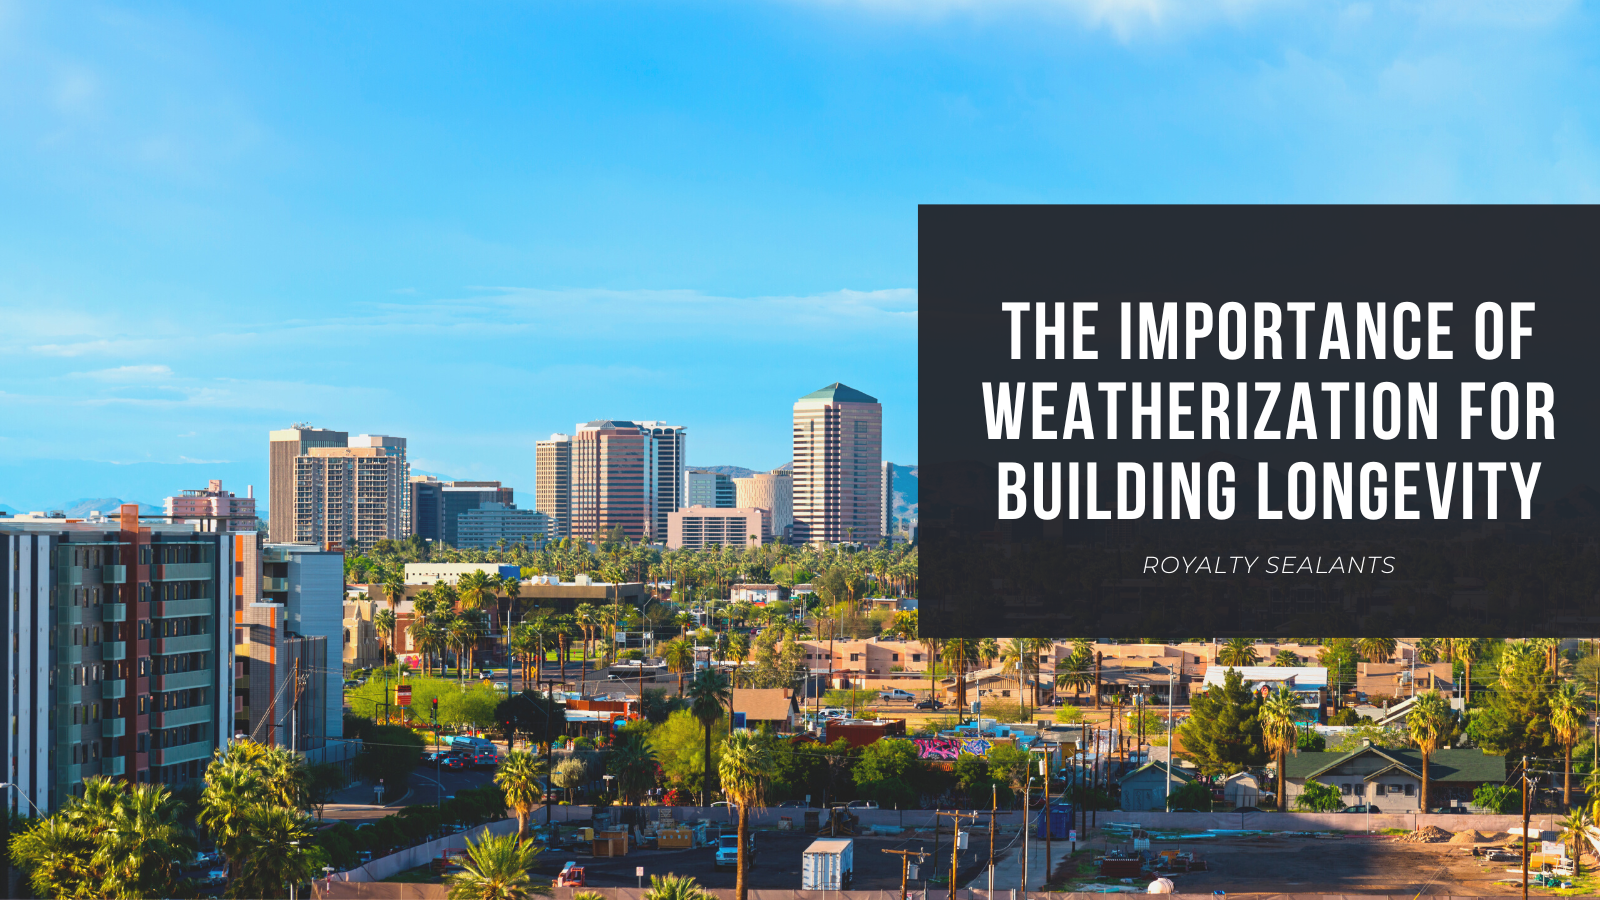 The Importance of Weatherization for Building Longevity